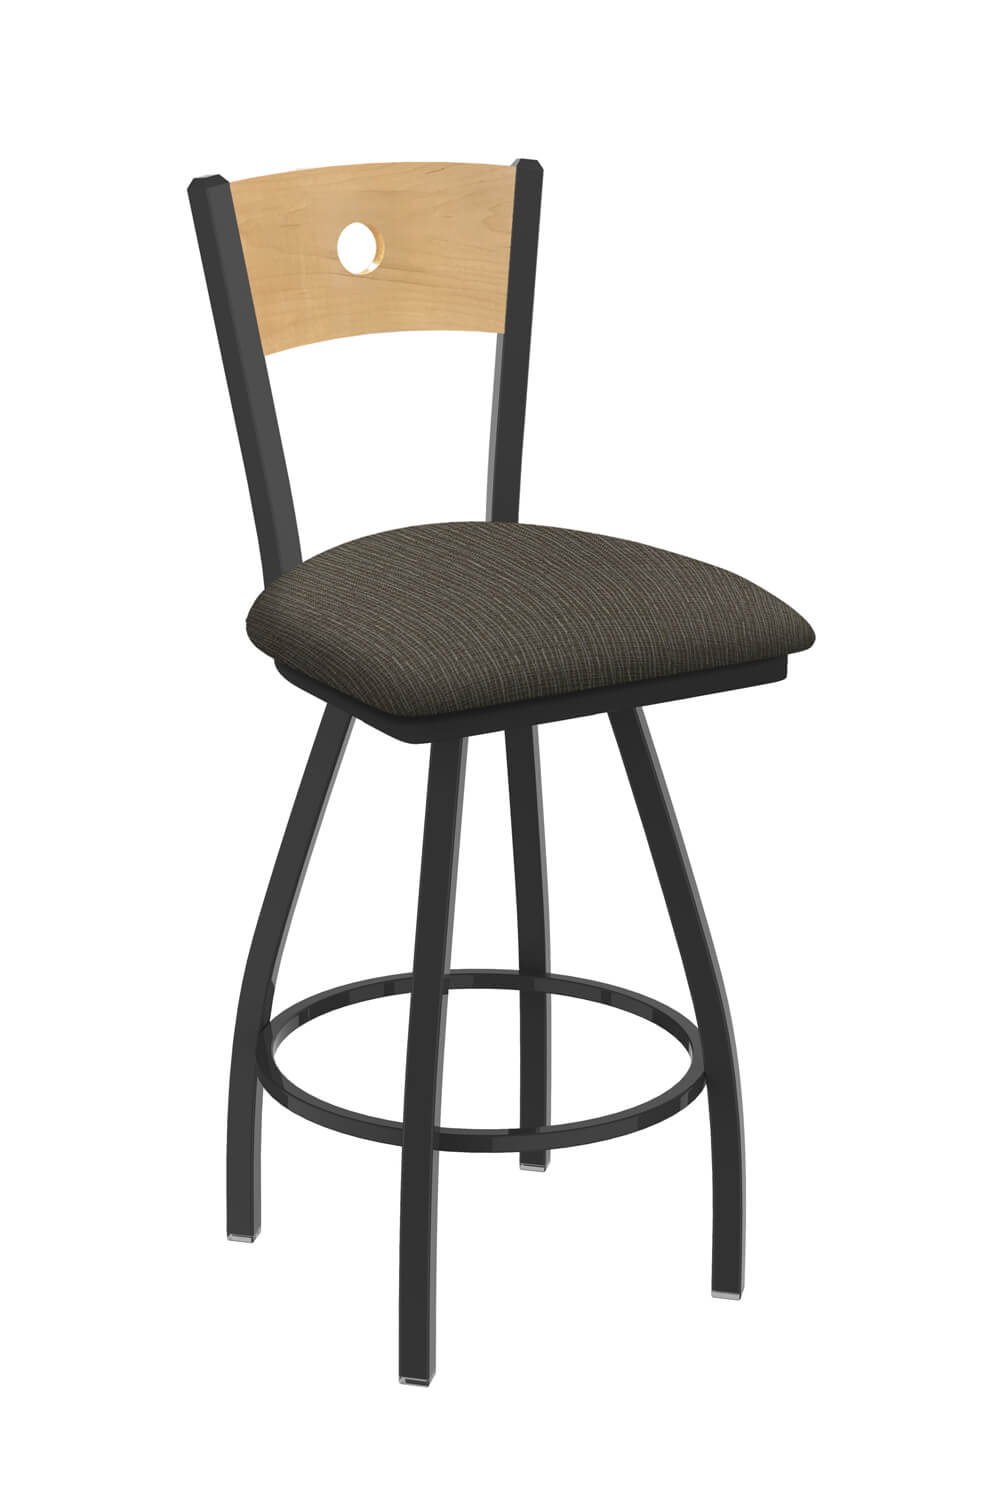 https://barstoolcomforts.com/wp-content/uploads/2017/07/holland-830-voltaire-xl-big-and-tall-swivel-barstool-with-back-in-pewter-metal-finish-natural-maple-back-wood-finish-and-graph-chalice-seat-cushion.jpg